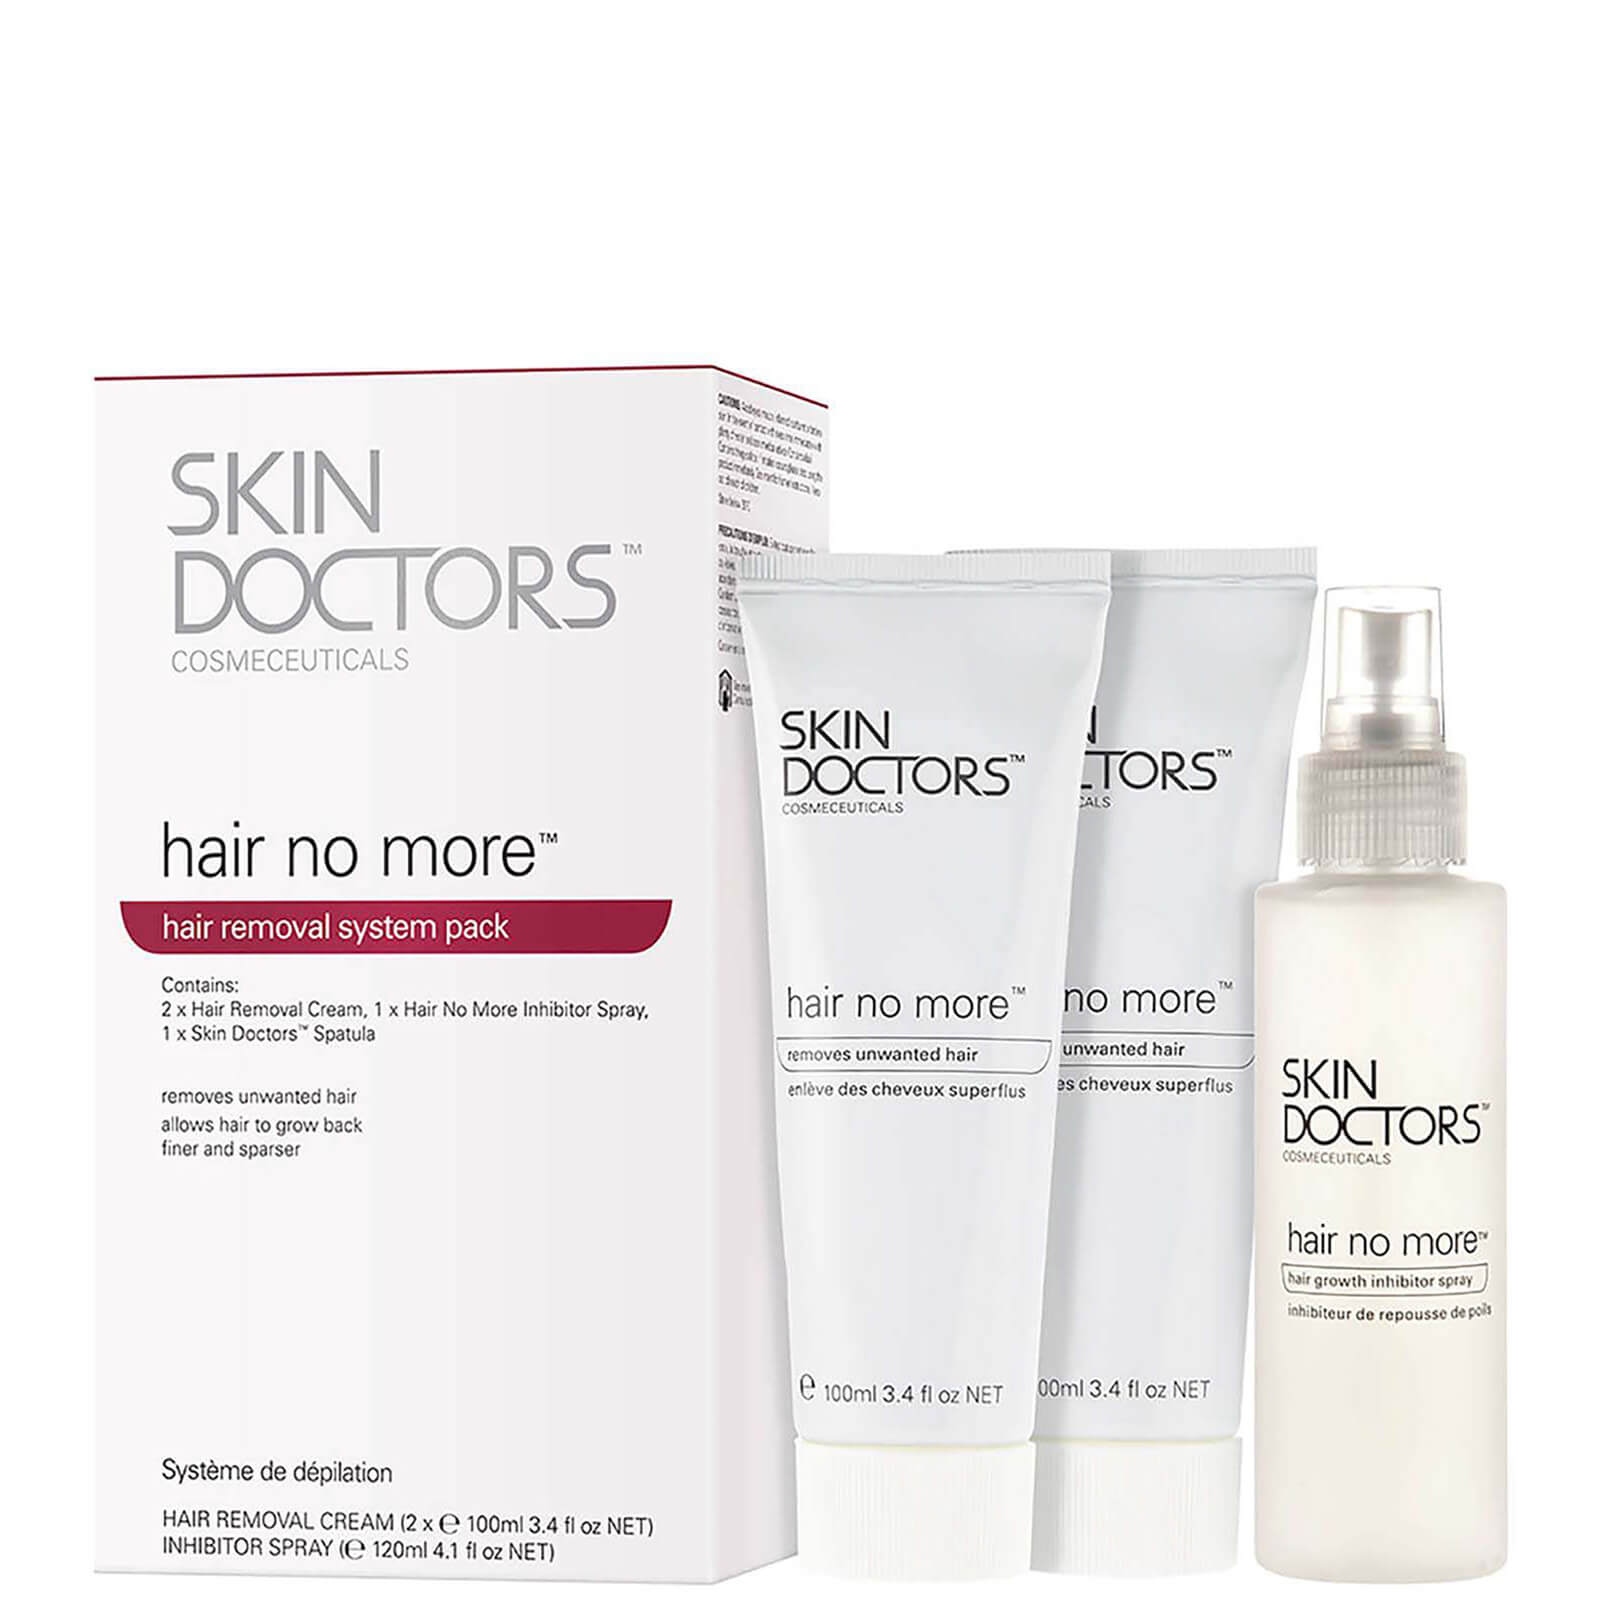 Photos - Cream / Lotion Skin Doctors Hair No More Hair Removal System Pack 2003 